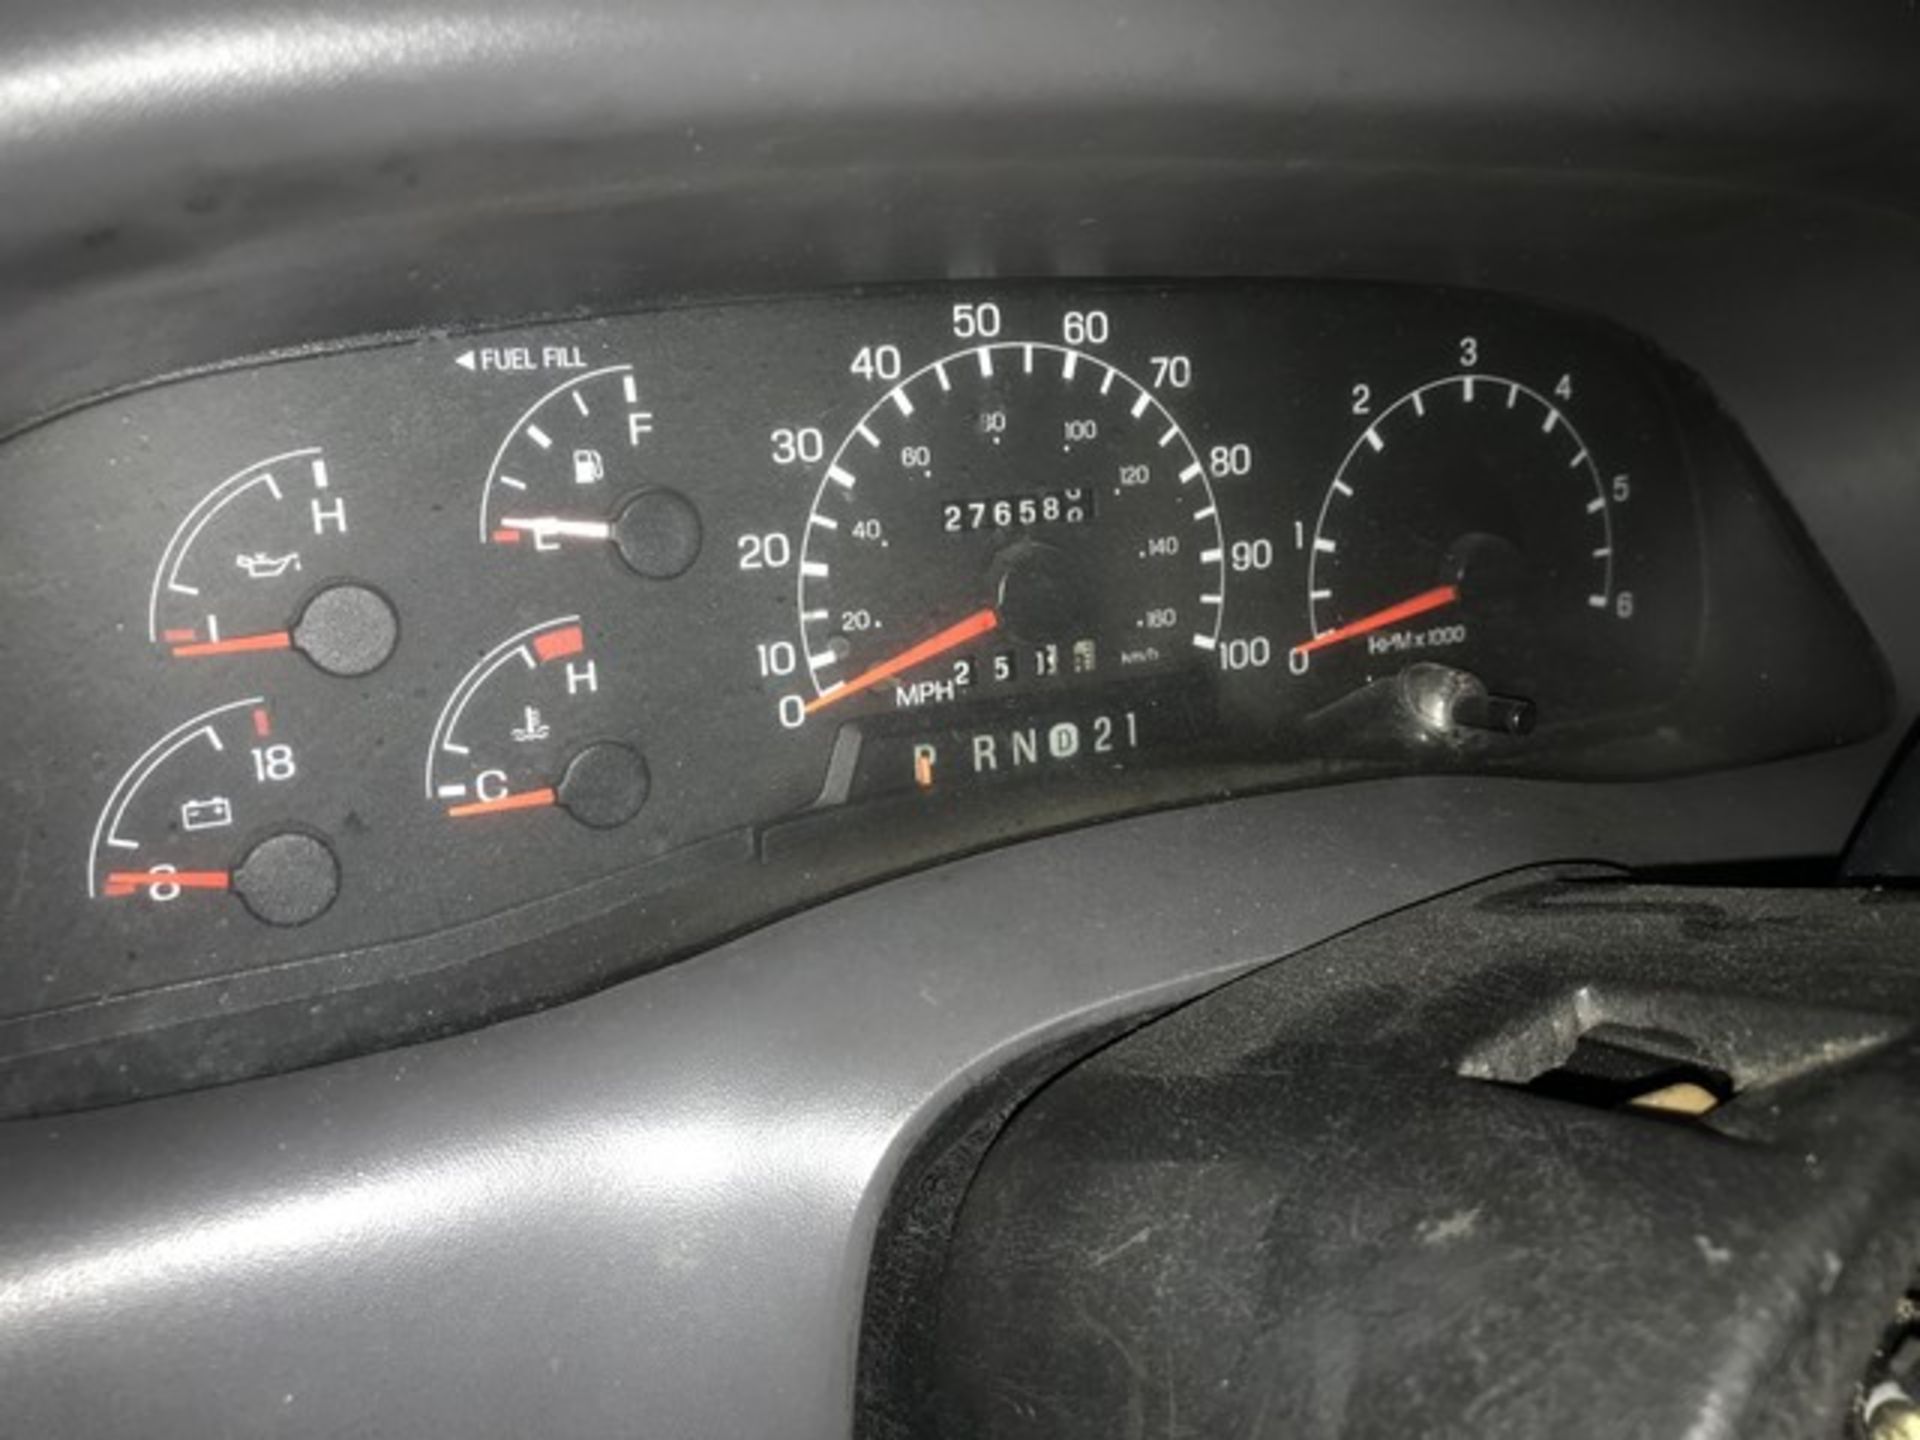 1999 FORD F-450 SUPER DUTY TOW TRUCK - 1FDXF46F9XEC26238 - WHITE - ODOMETER READS 276,589 MILES - - Image 7 of 11